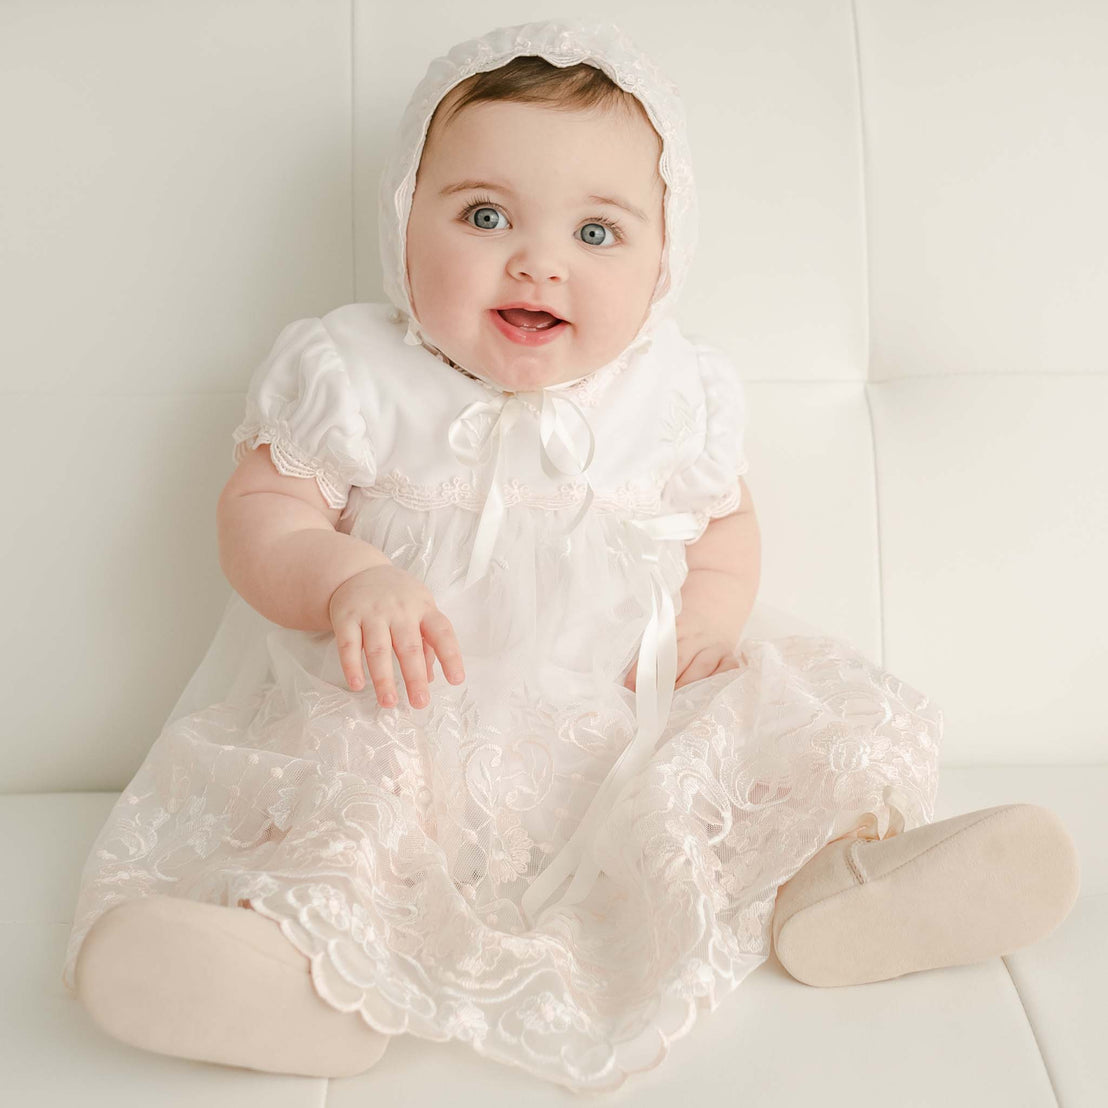 A joyful baby with blue eyes, wearing a Joli Romper Dress and vintage-inspired matching bonnet, sits on a white sofa, looking up with a wide smile.